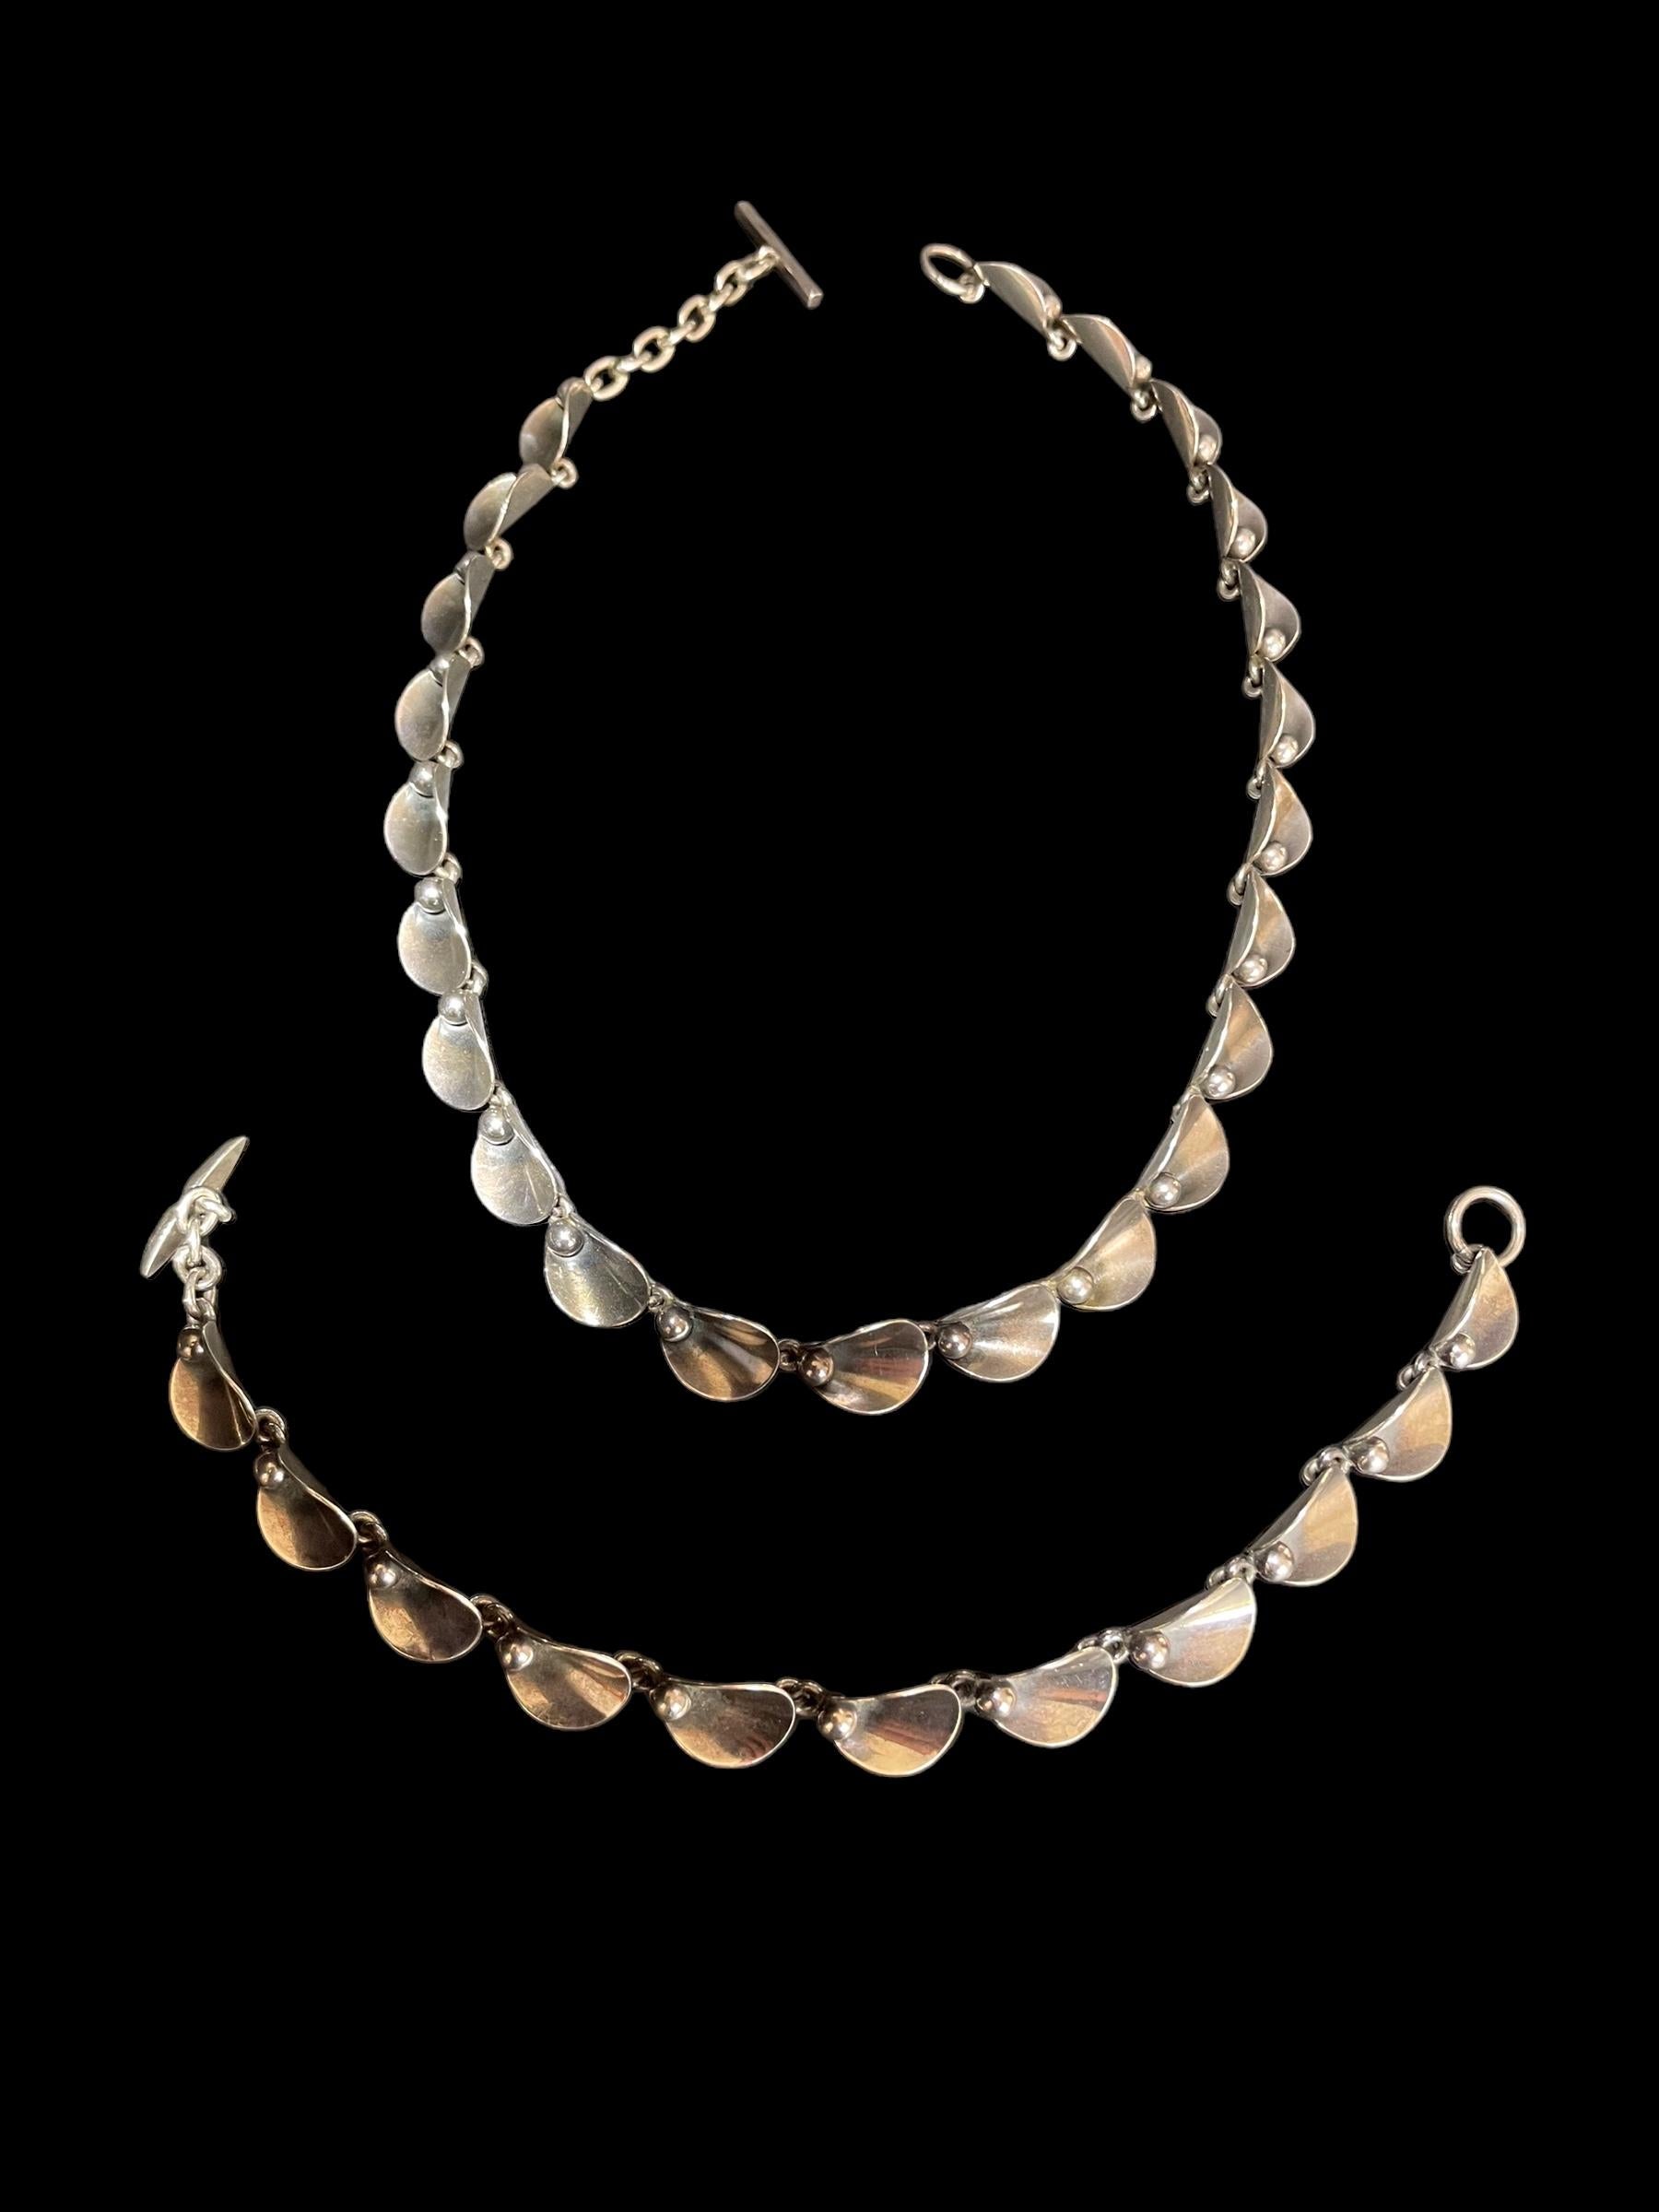 Danish Silver Necklace And Bracelet By Niels Erik From For Sale